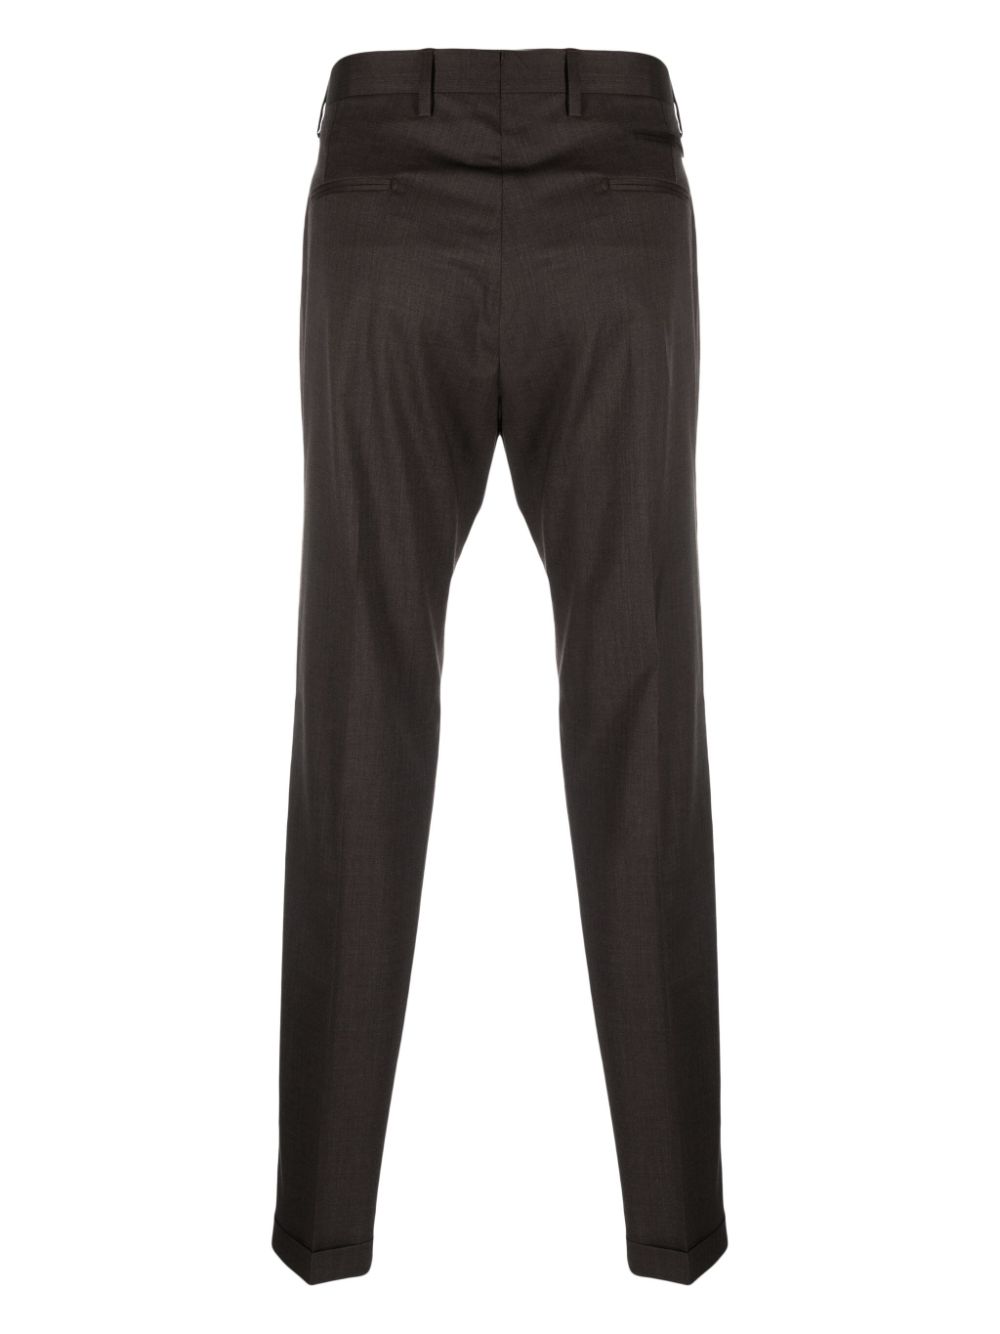 brown tailored trousers